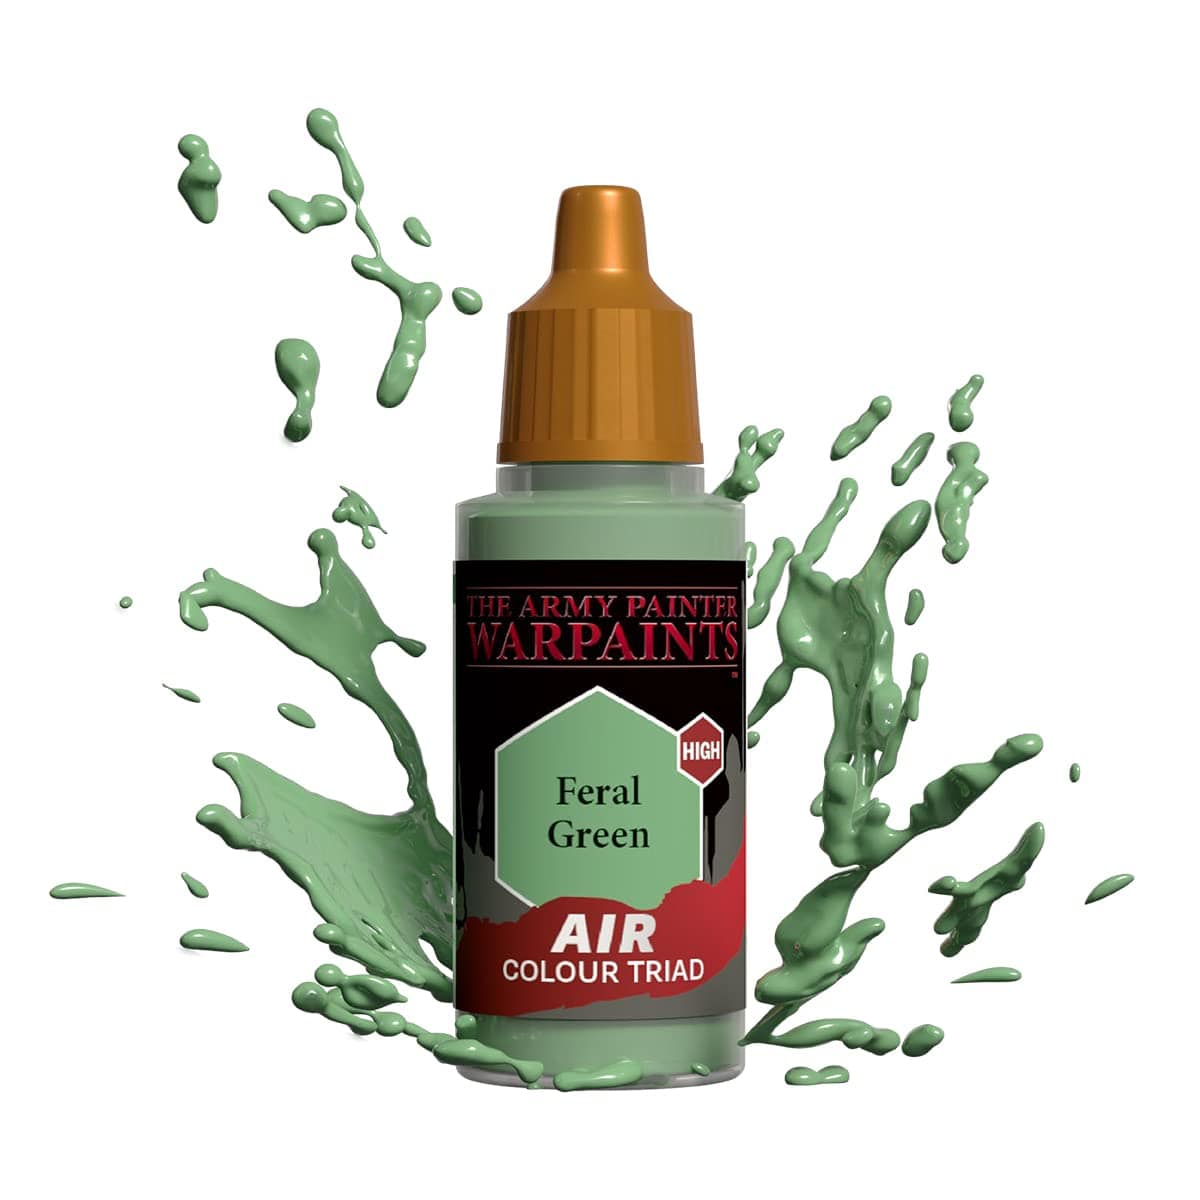 The Army Painter Accessories The Army Painter Warpaints Air: Feral Green 18ml